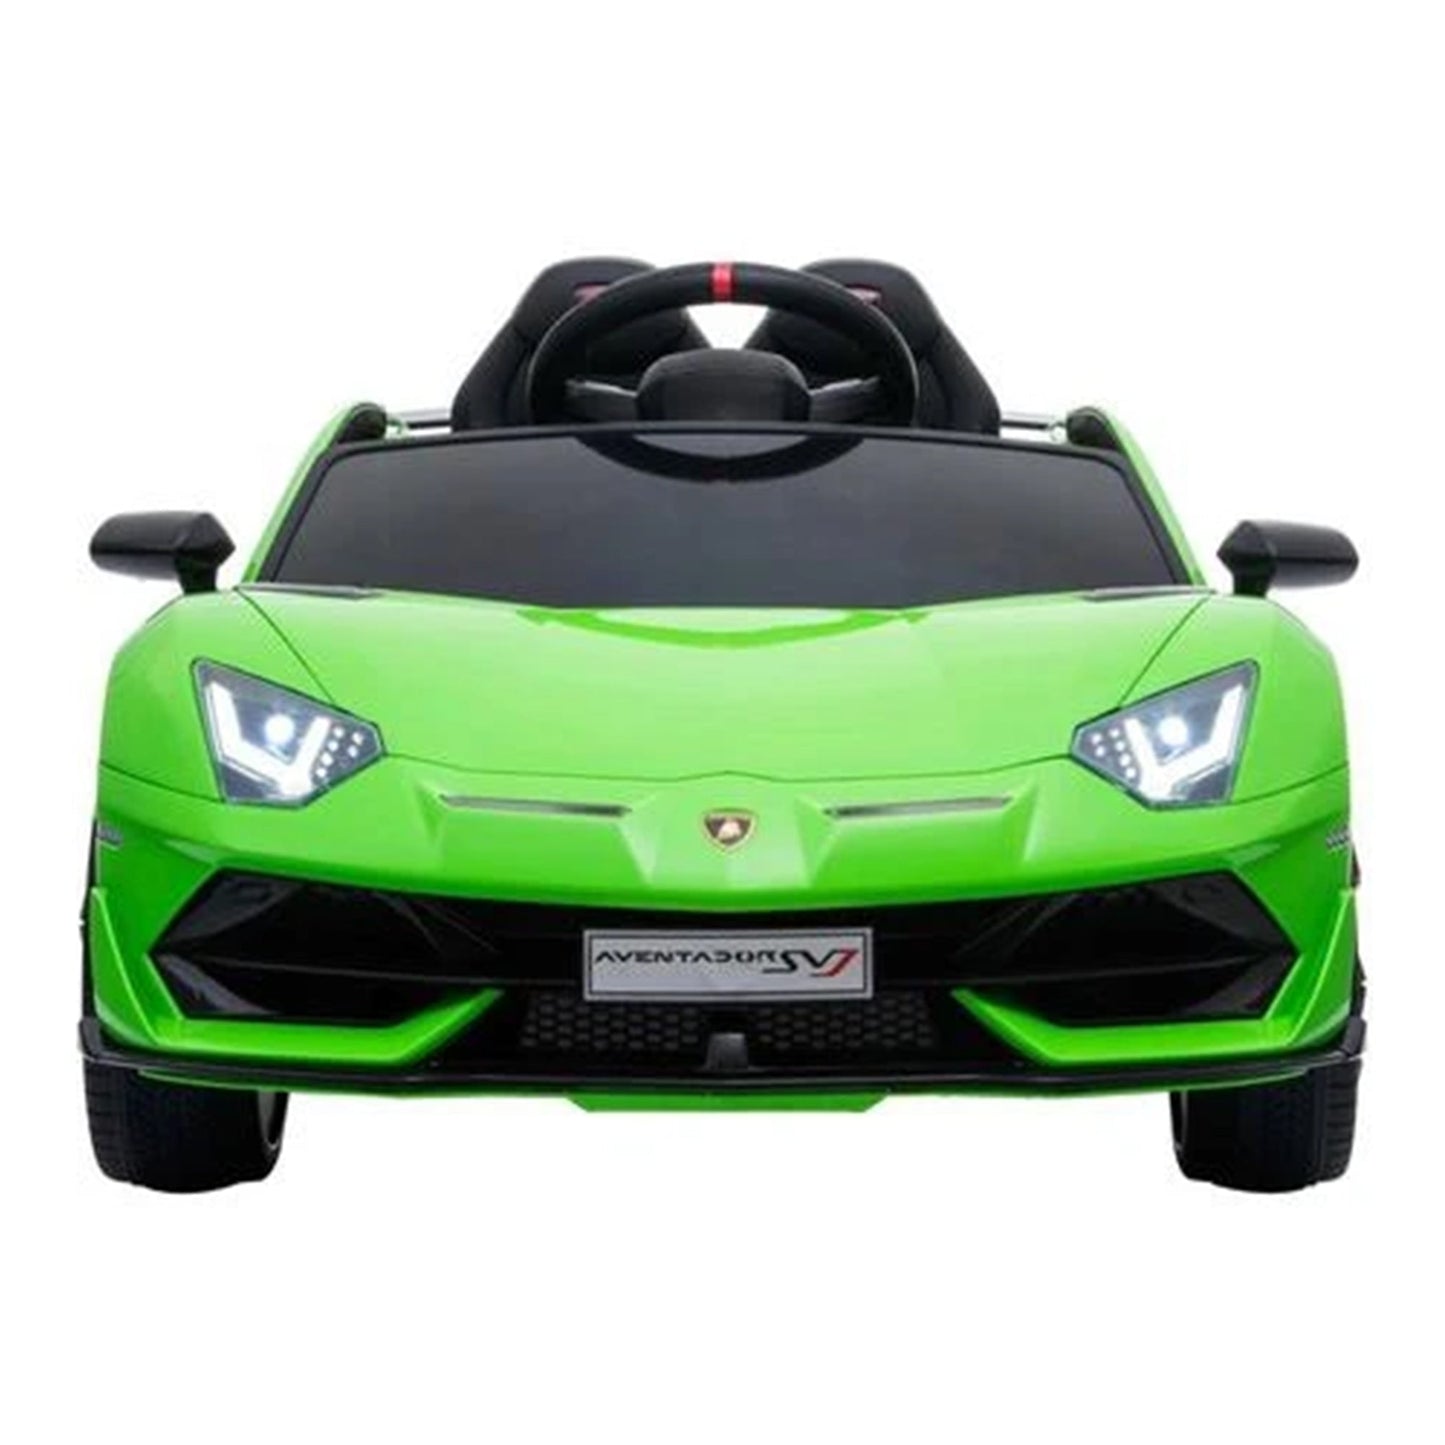 Green Lamborghini SVJ kids ride on car with parental remote control available at Kids Car store.